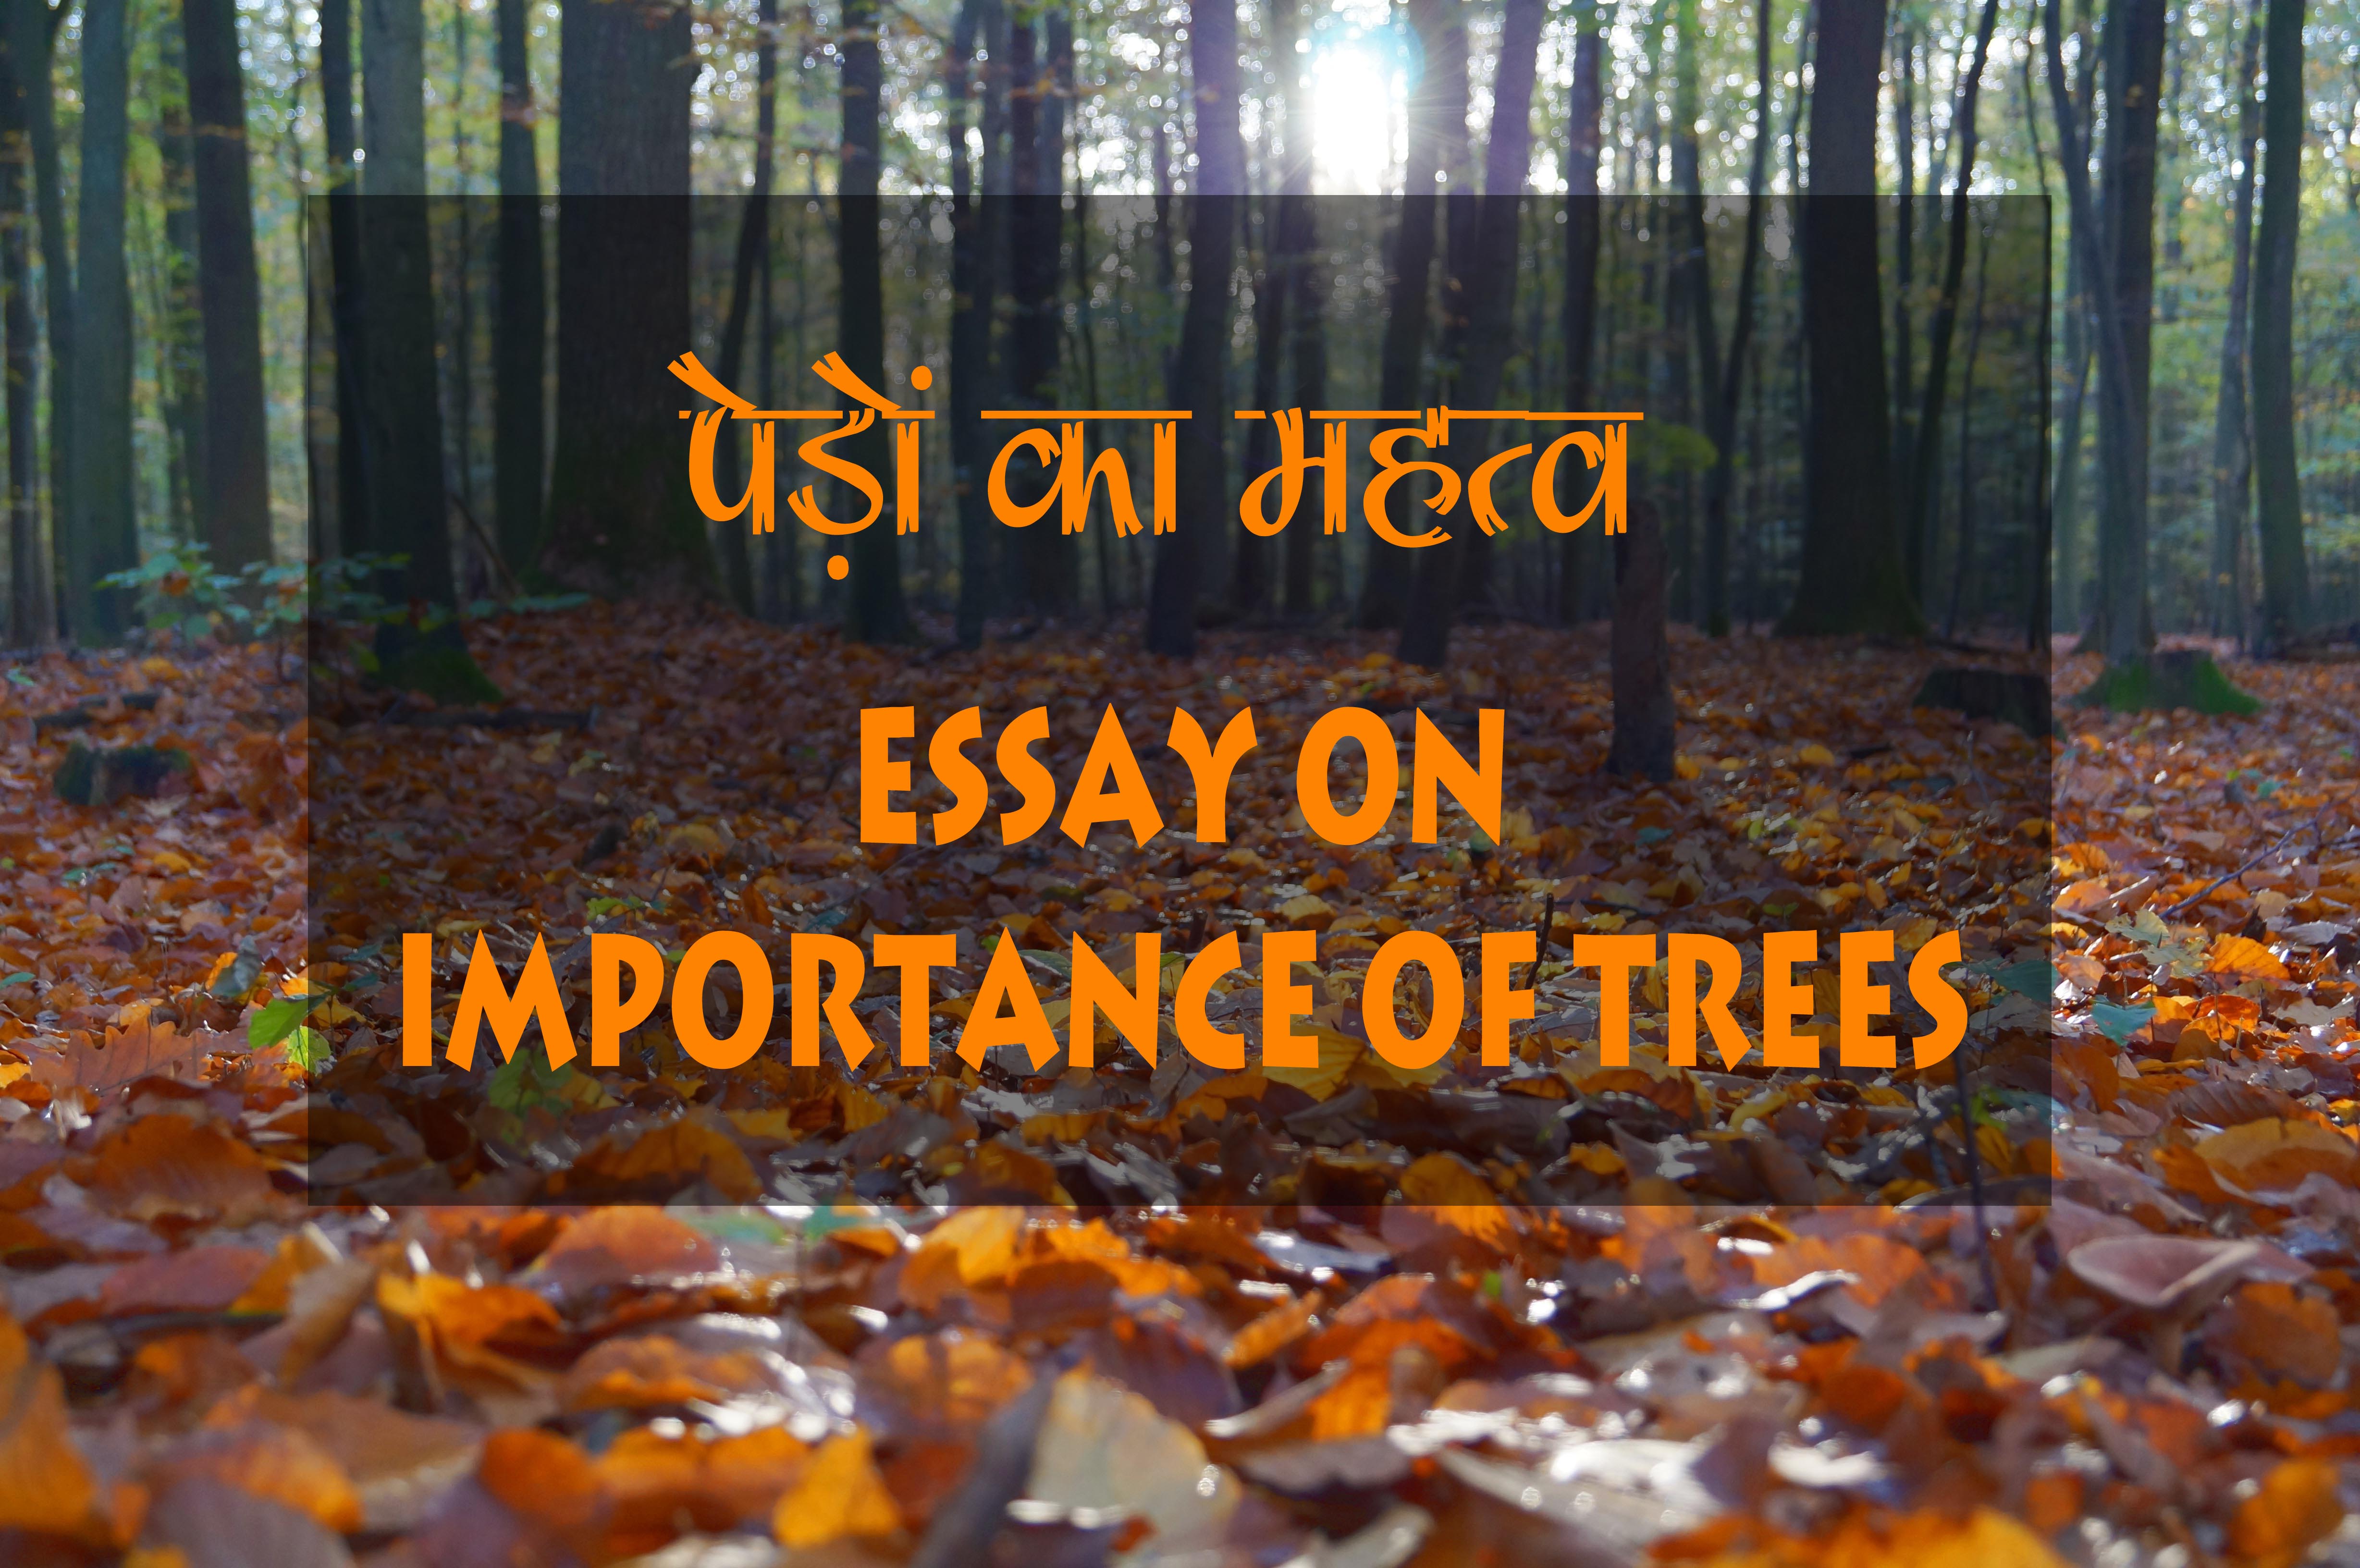 importance of trees essay 200 words in hindi